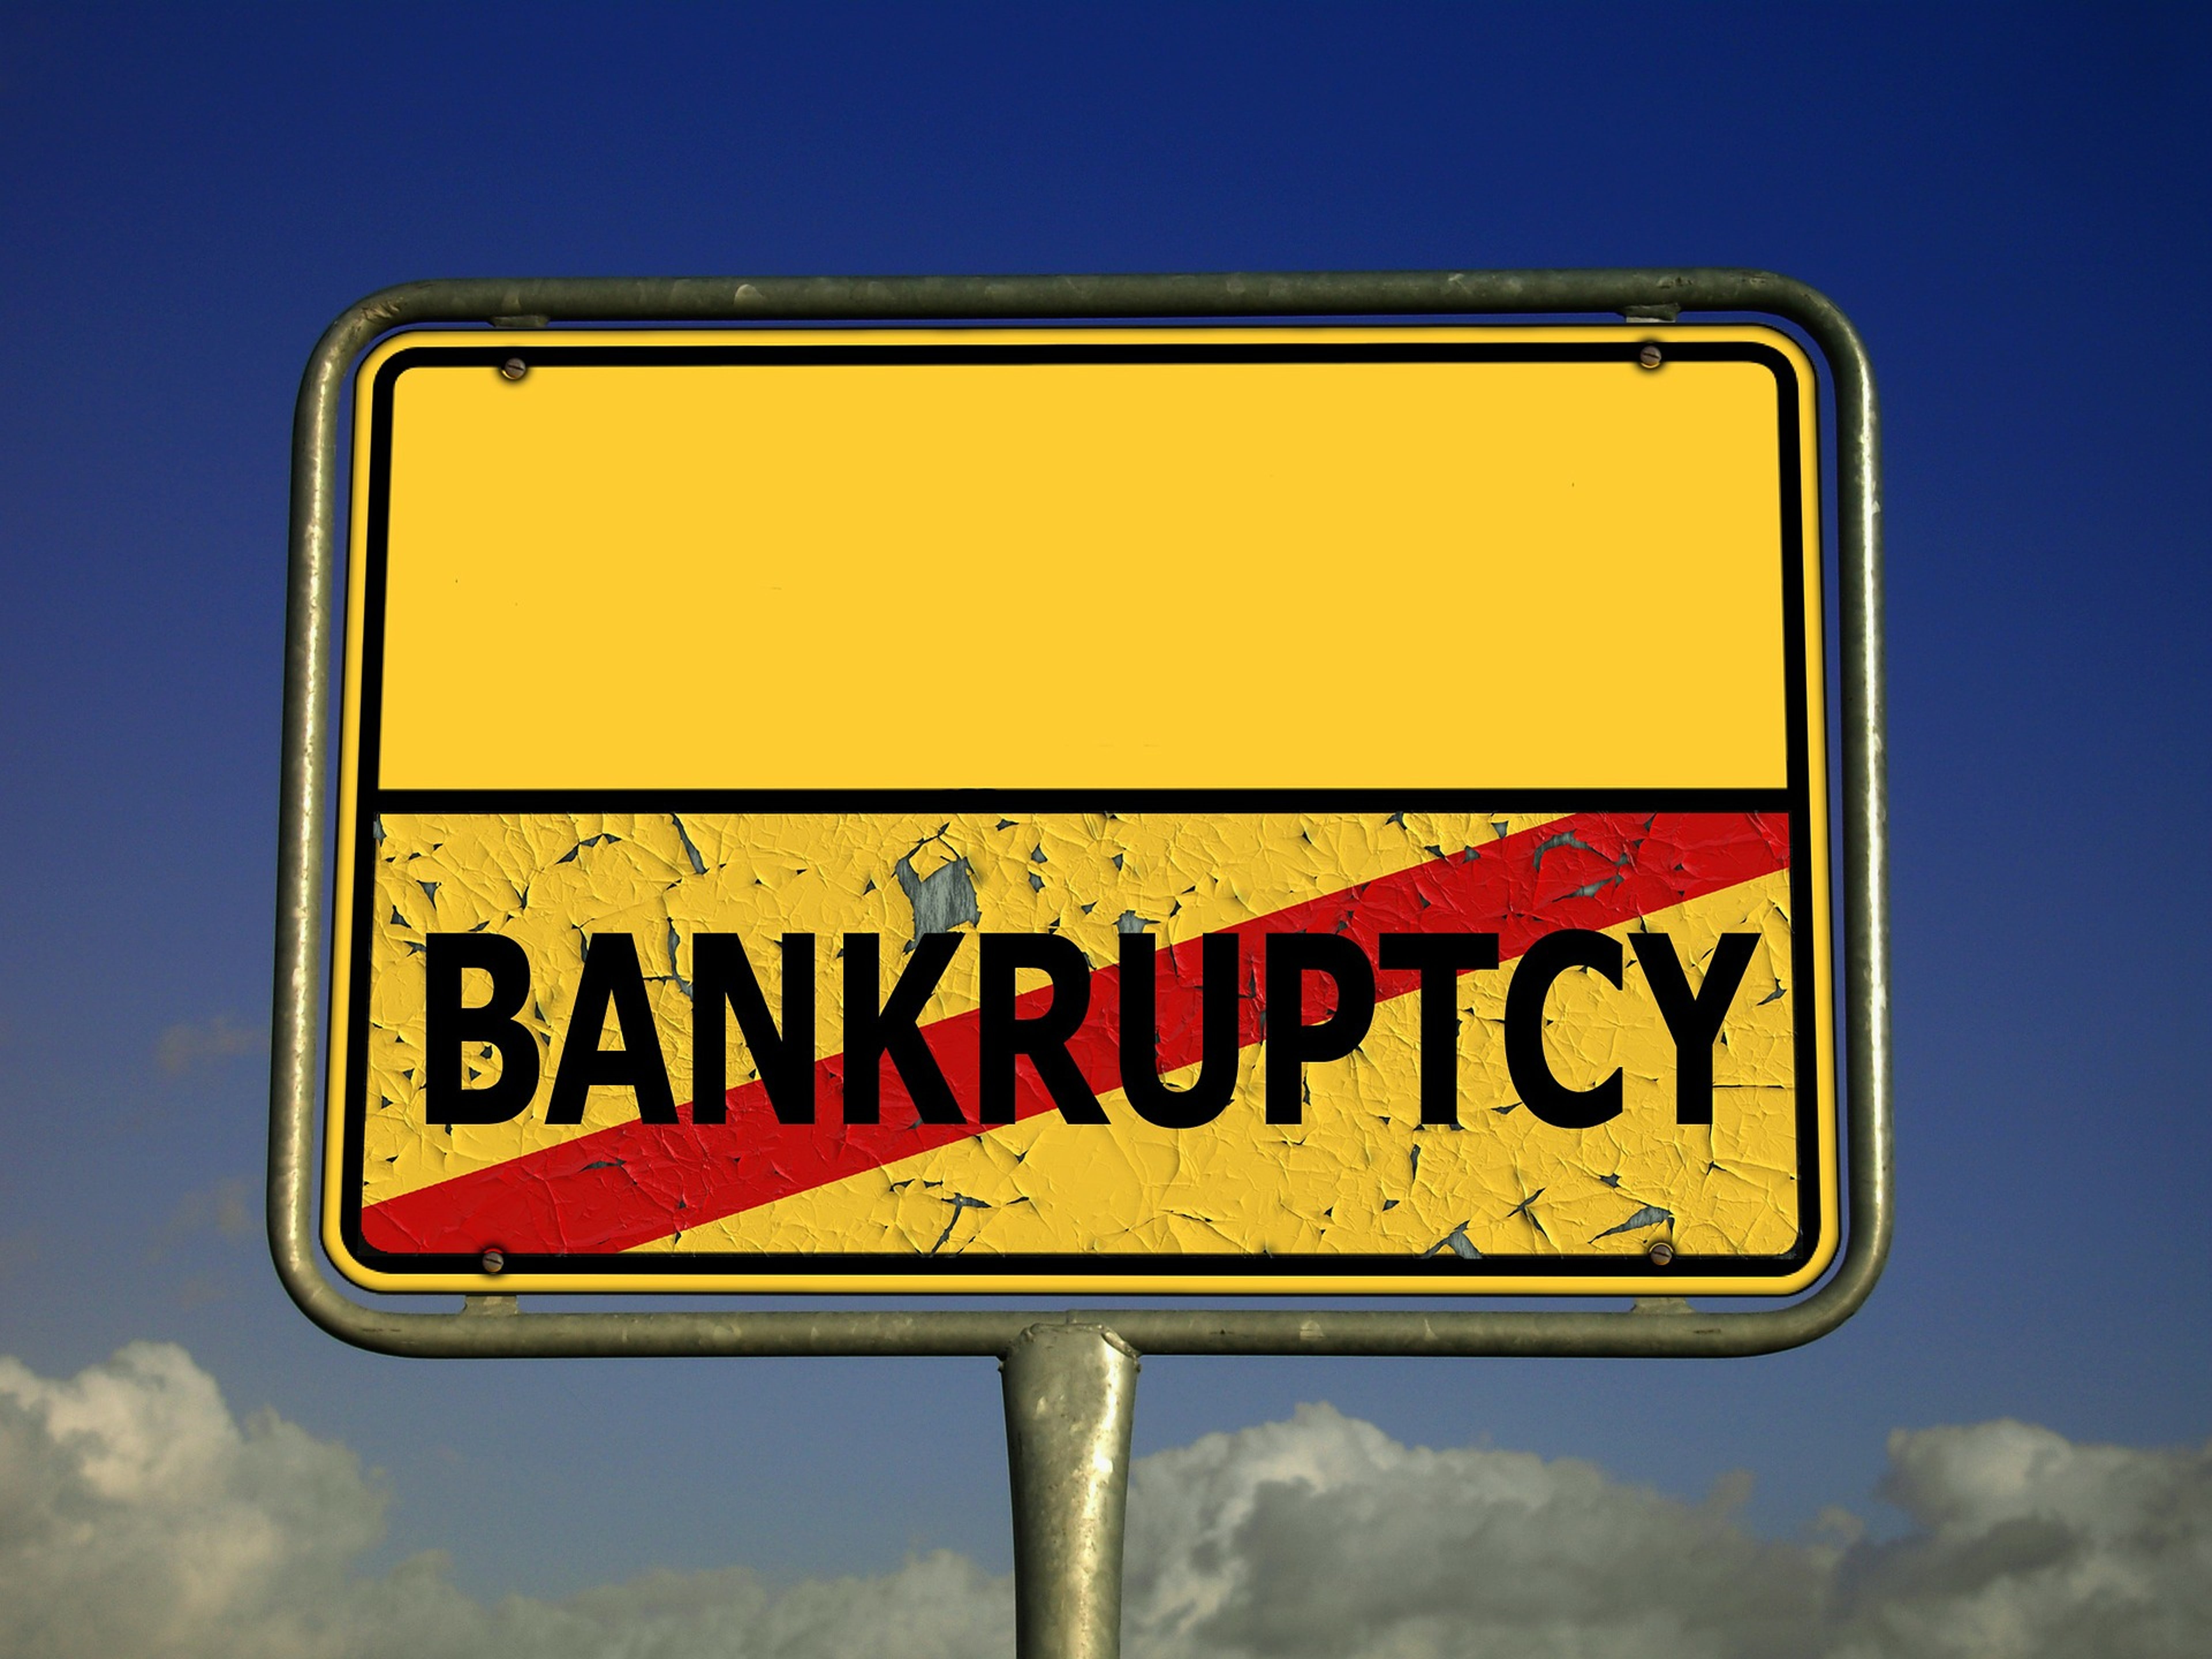 Century 21, J.C. Penney And J. Crew Are Just 3 Retailers On The Growing List Of 2020 Bankruptcies